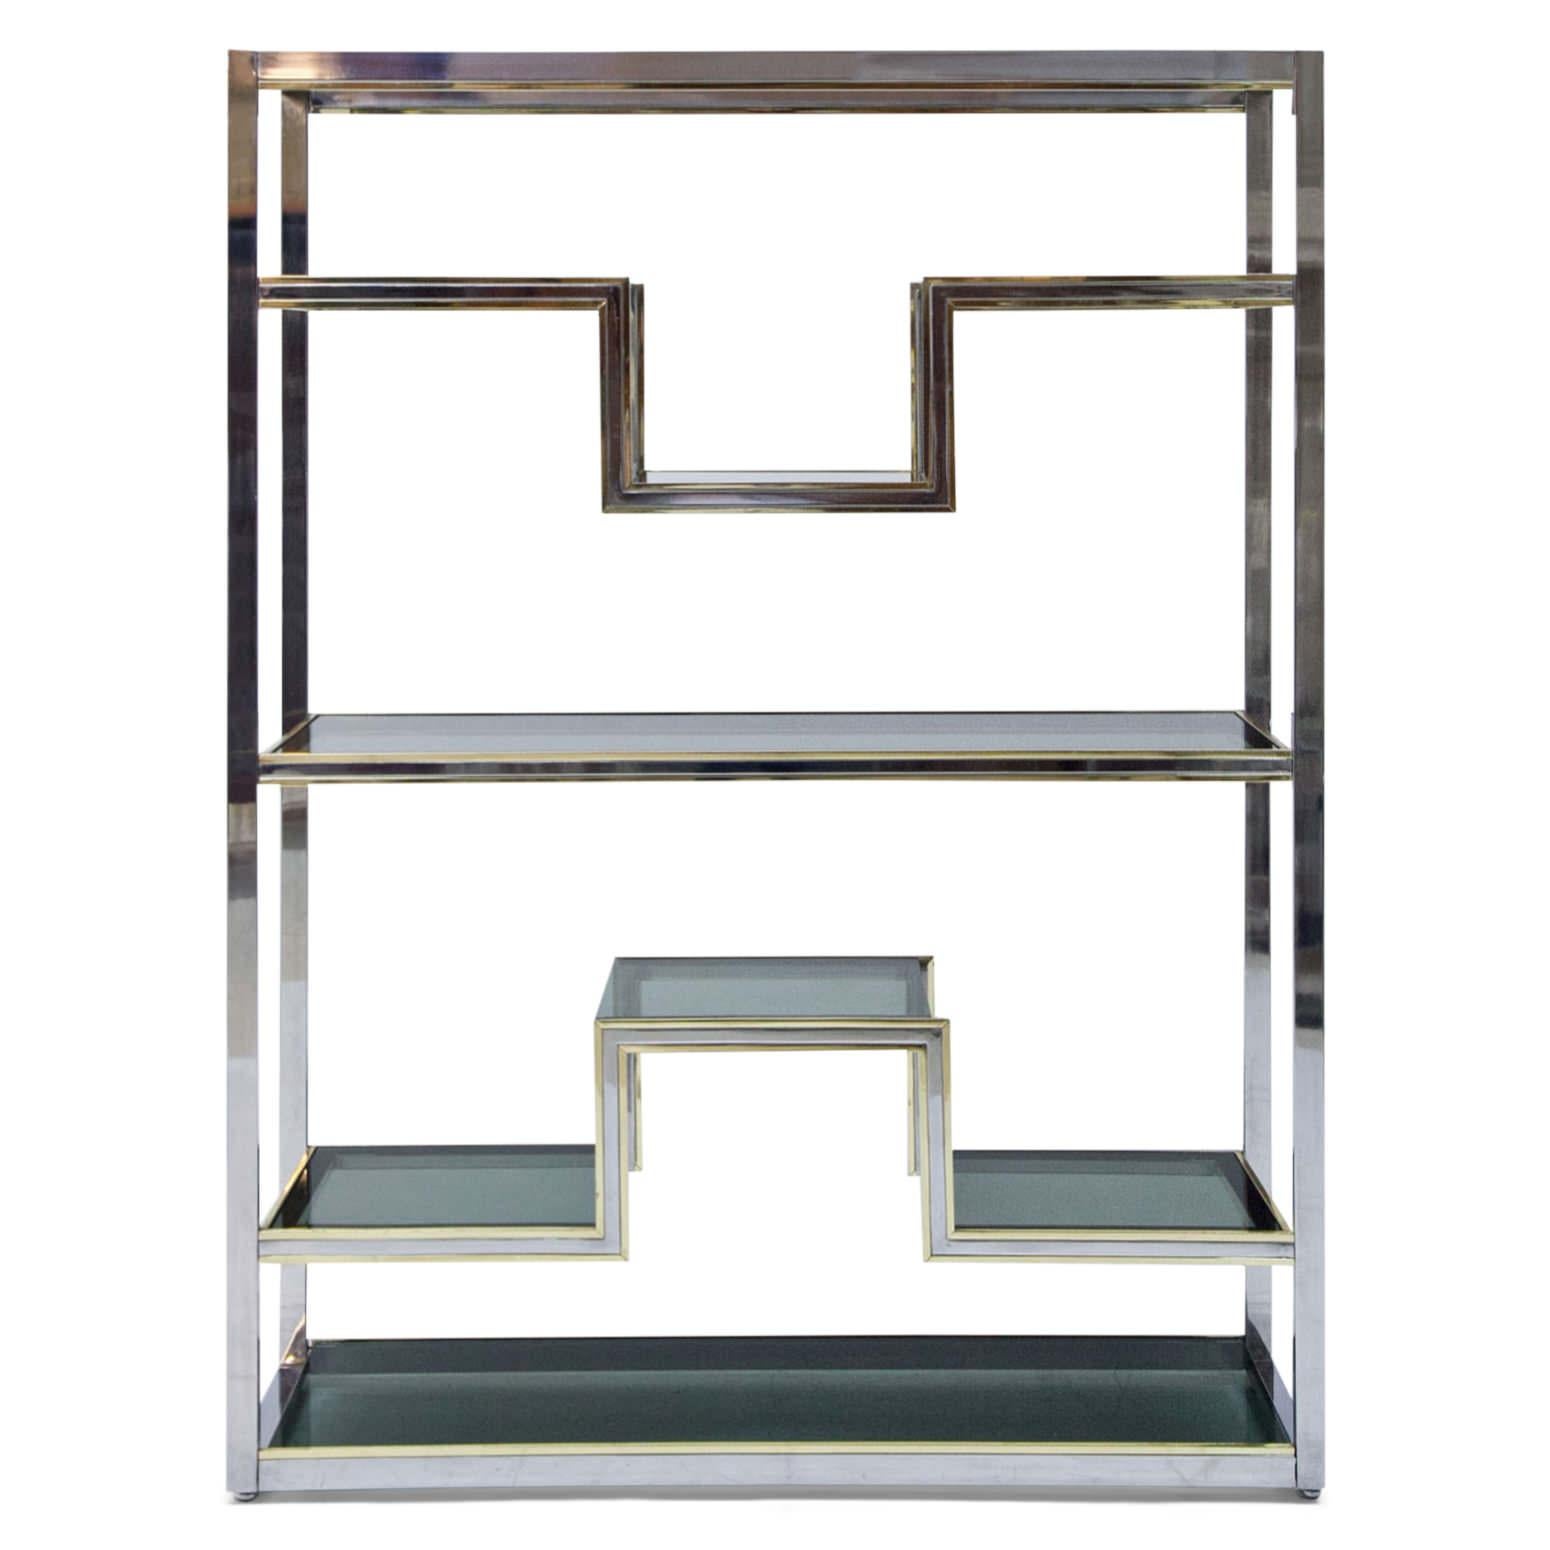 Large shelf by Romeo Rega with two straight shelves and two shelves with lowered/raised middle part. This extraordinary shelf is perfect for displaying objects and can be used as a room divider. The shelves are smoked glass; the frame is chrome with